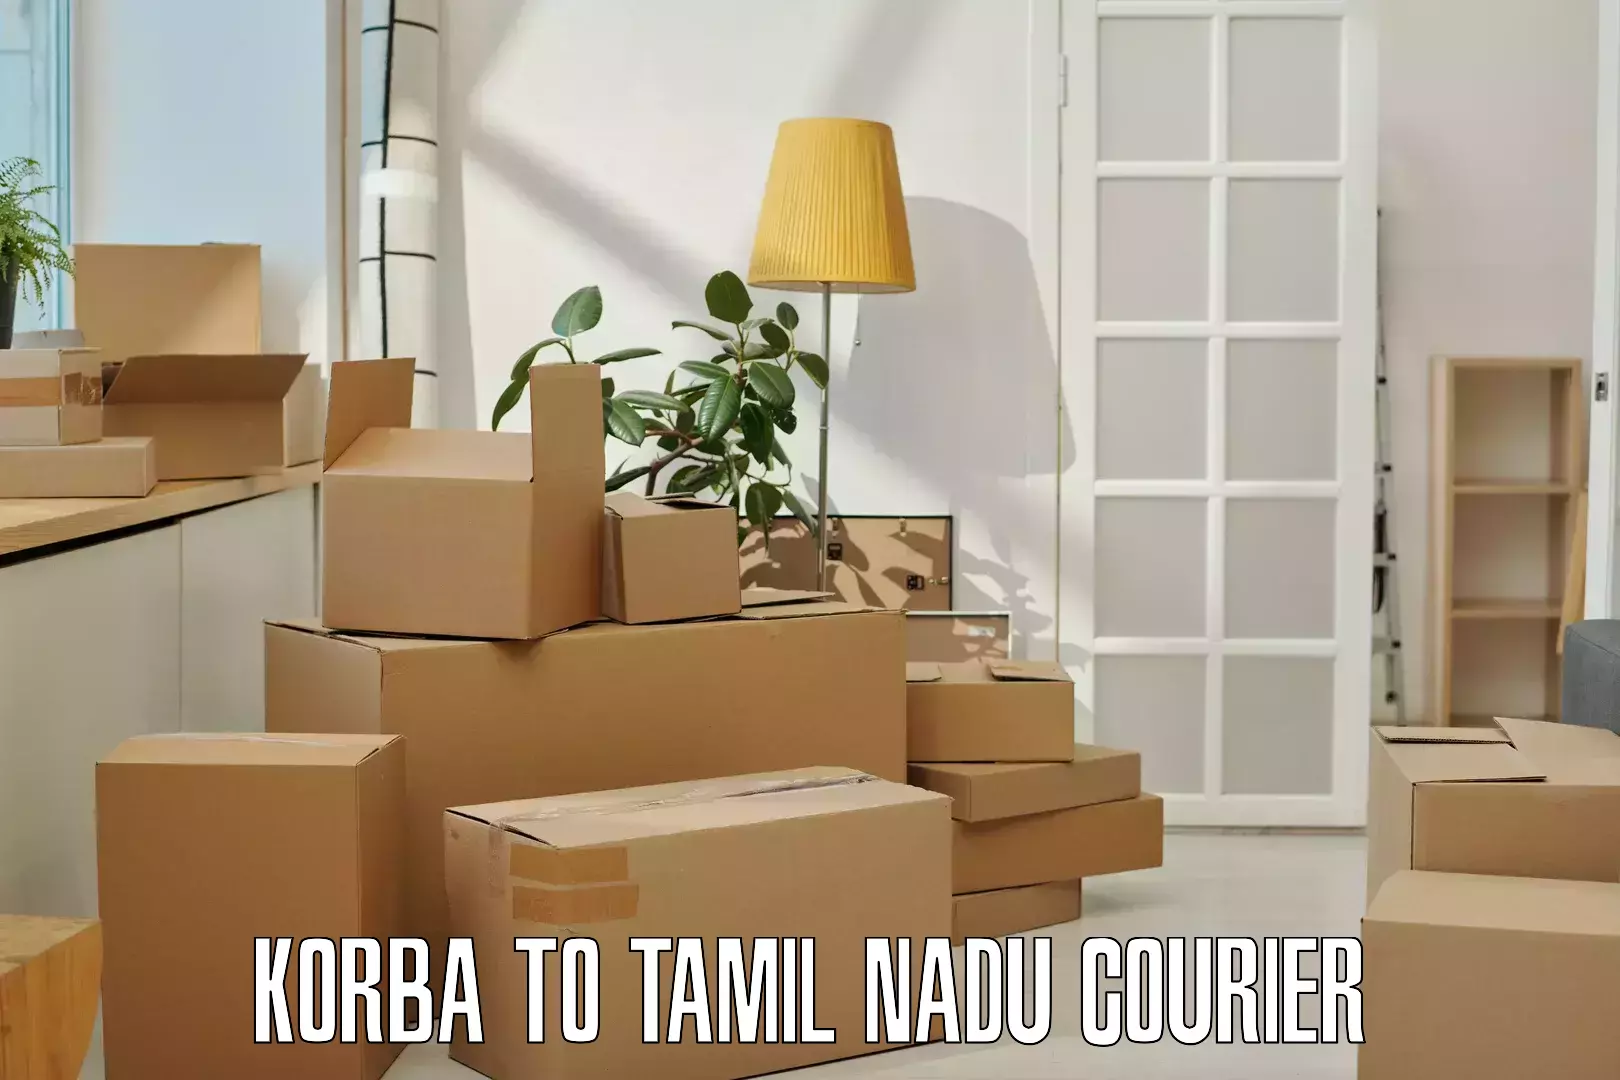 Sustainable shipping practices Korba to Hosur